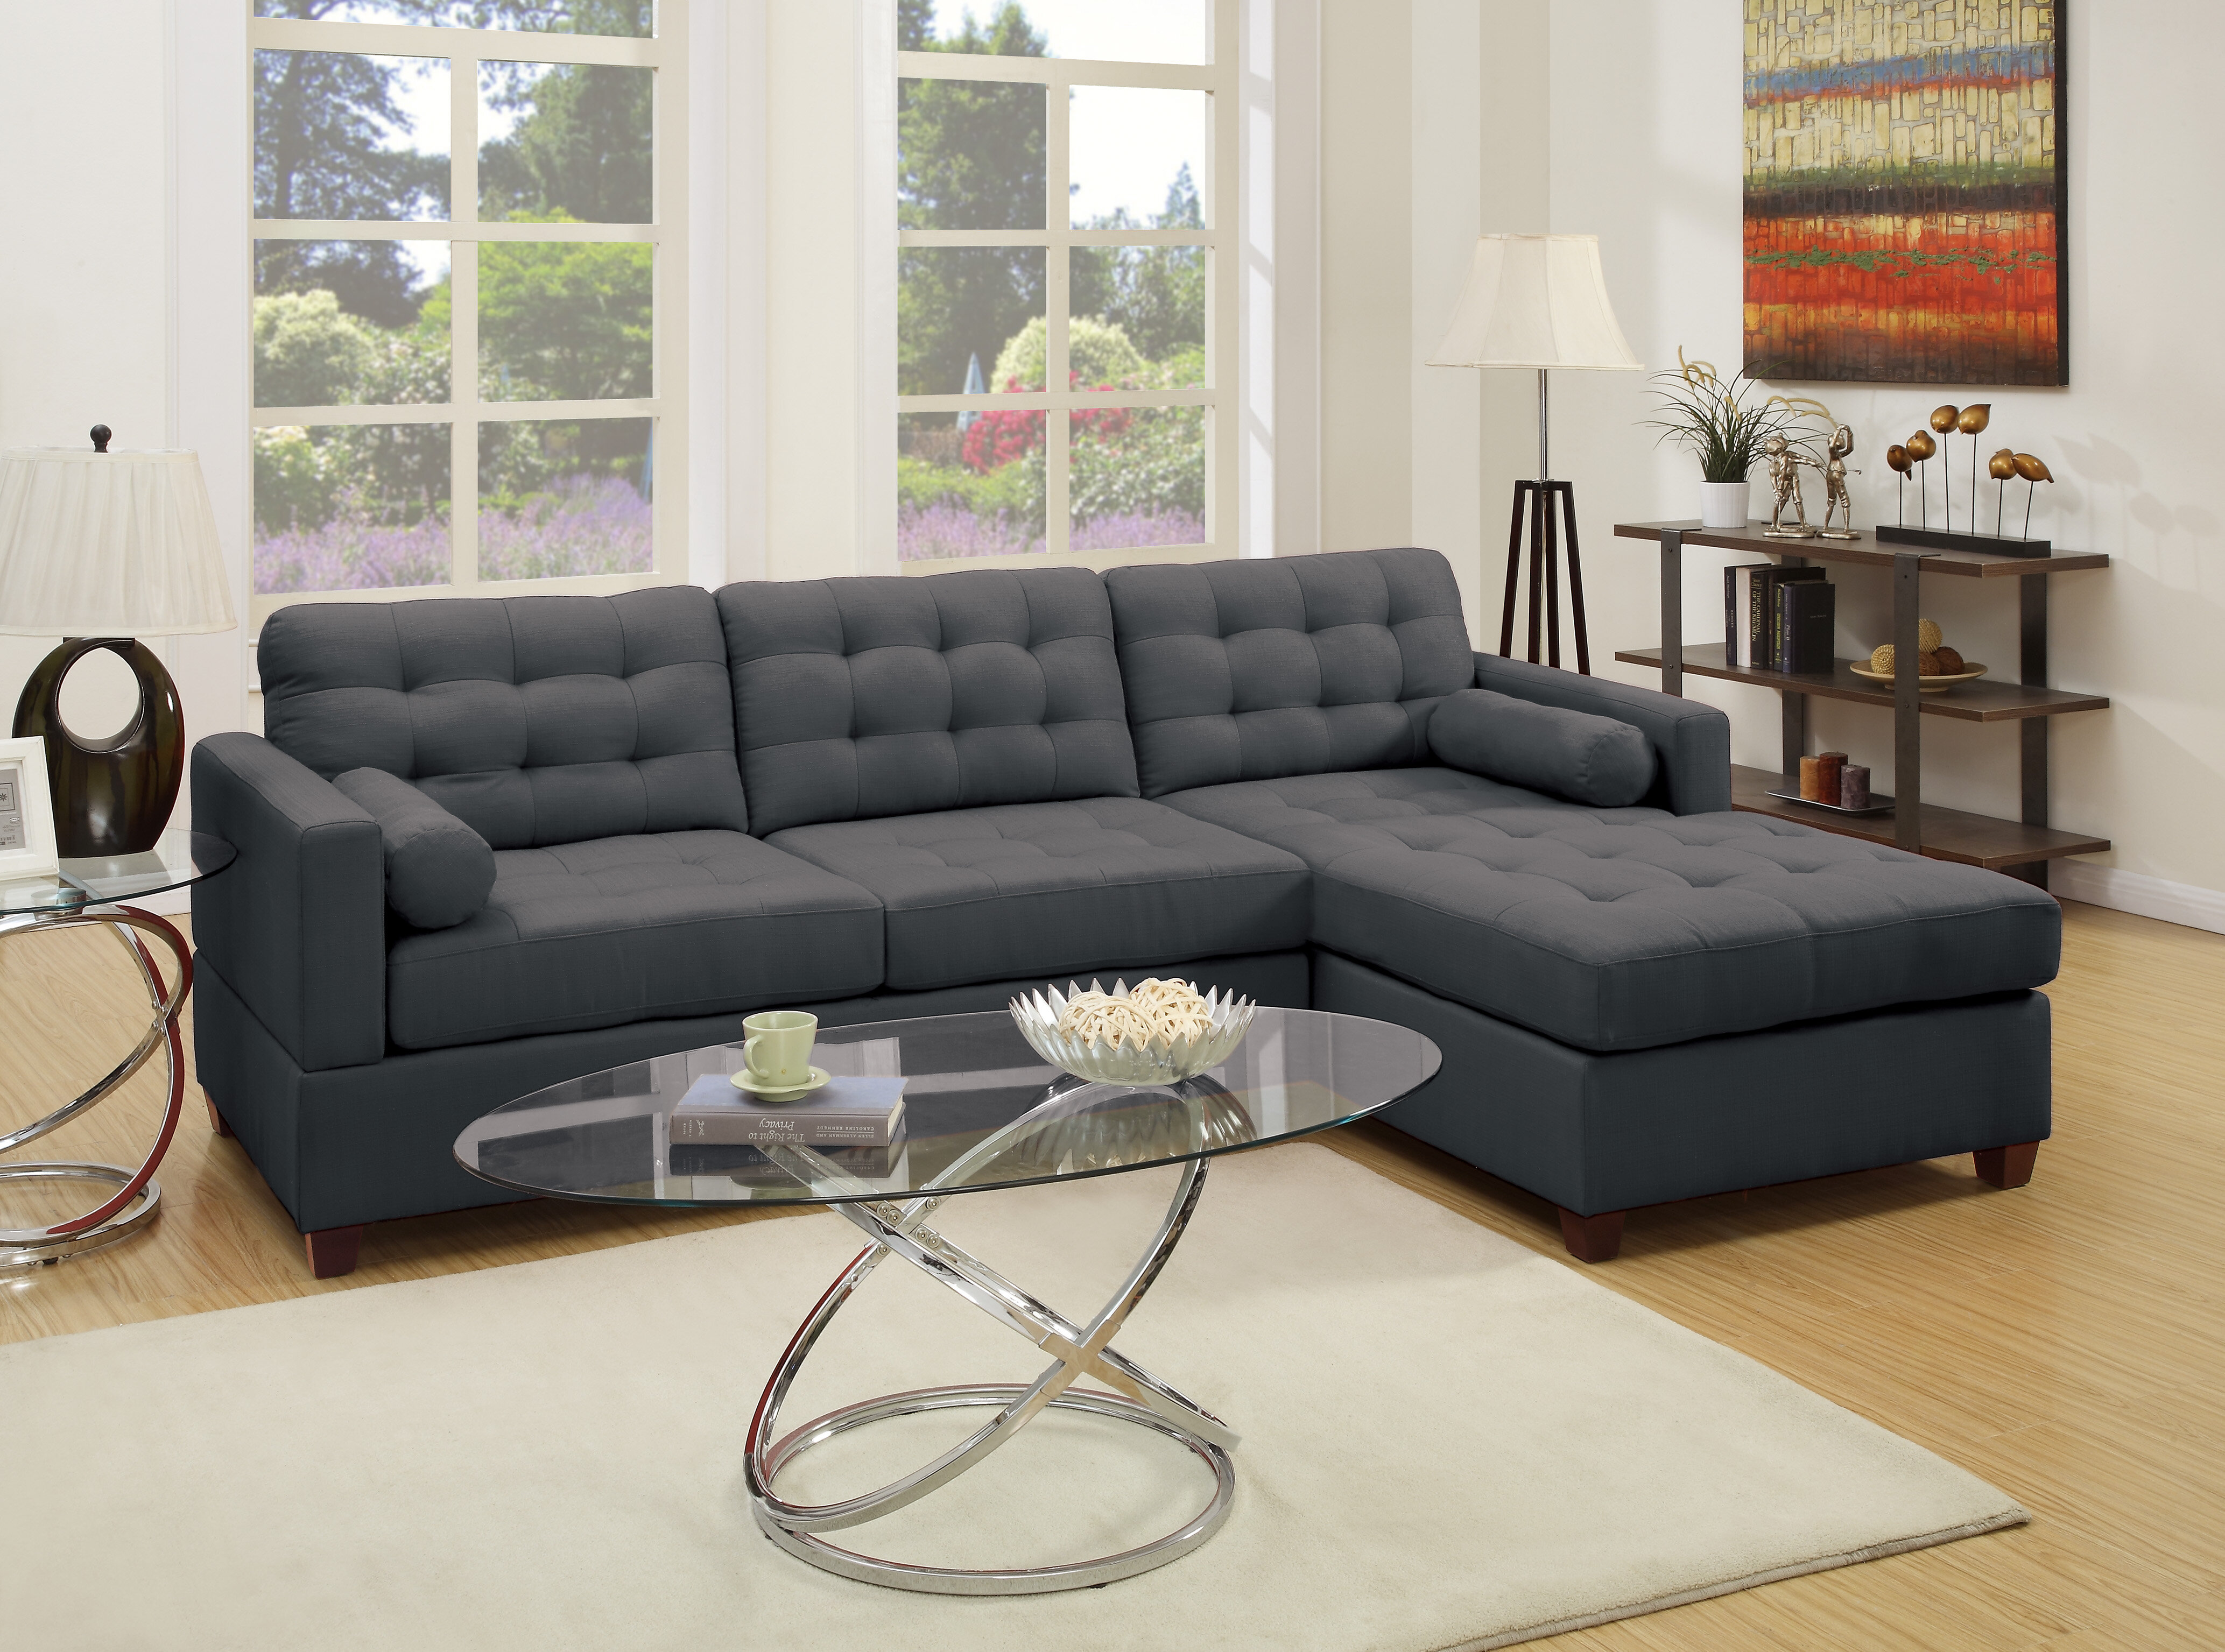 Upper Stanton 102″ Wide Reversible Sofa and Chaise